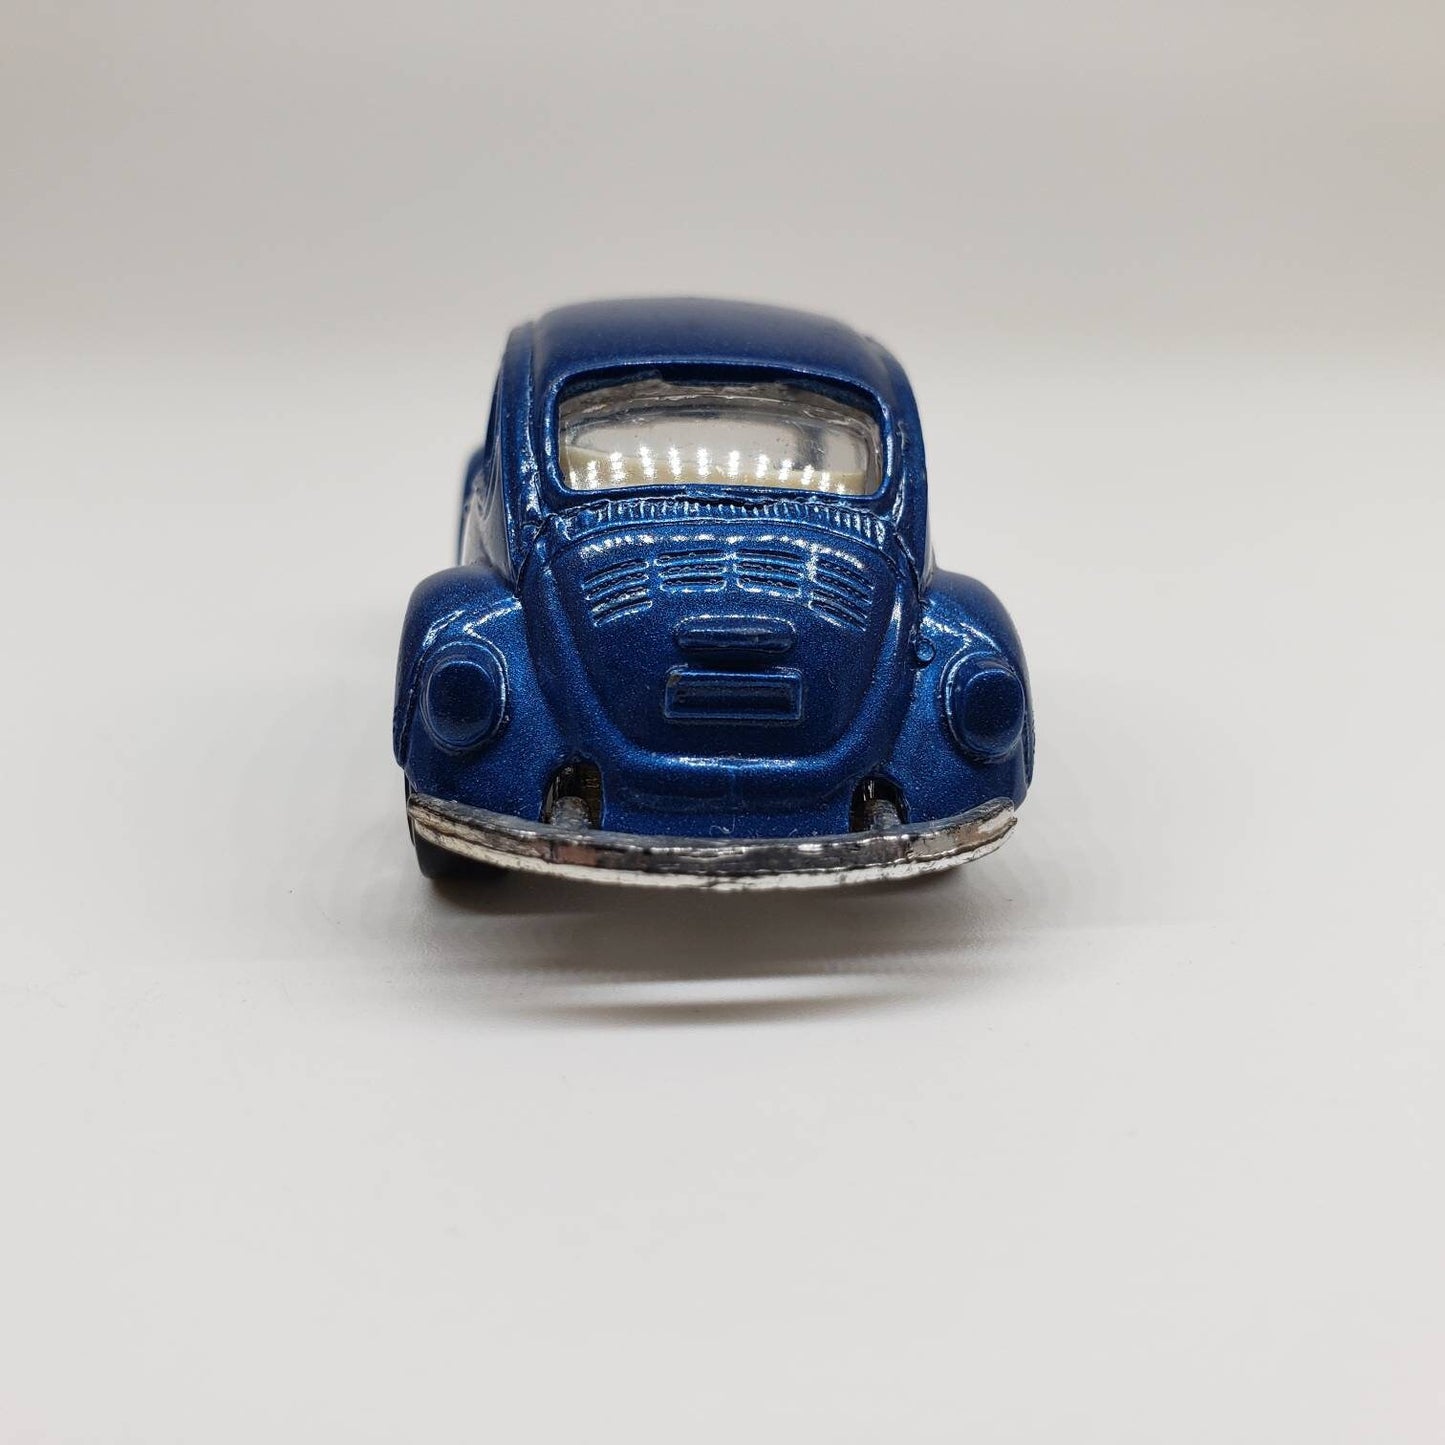 Maisto VW 1300 Blue Historic Hit Perfect Birthday Gift Miniature Collectable Scale Model Toy Car